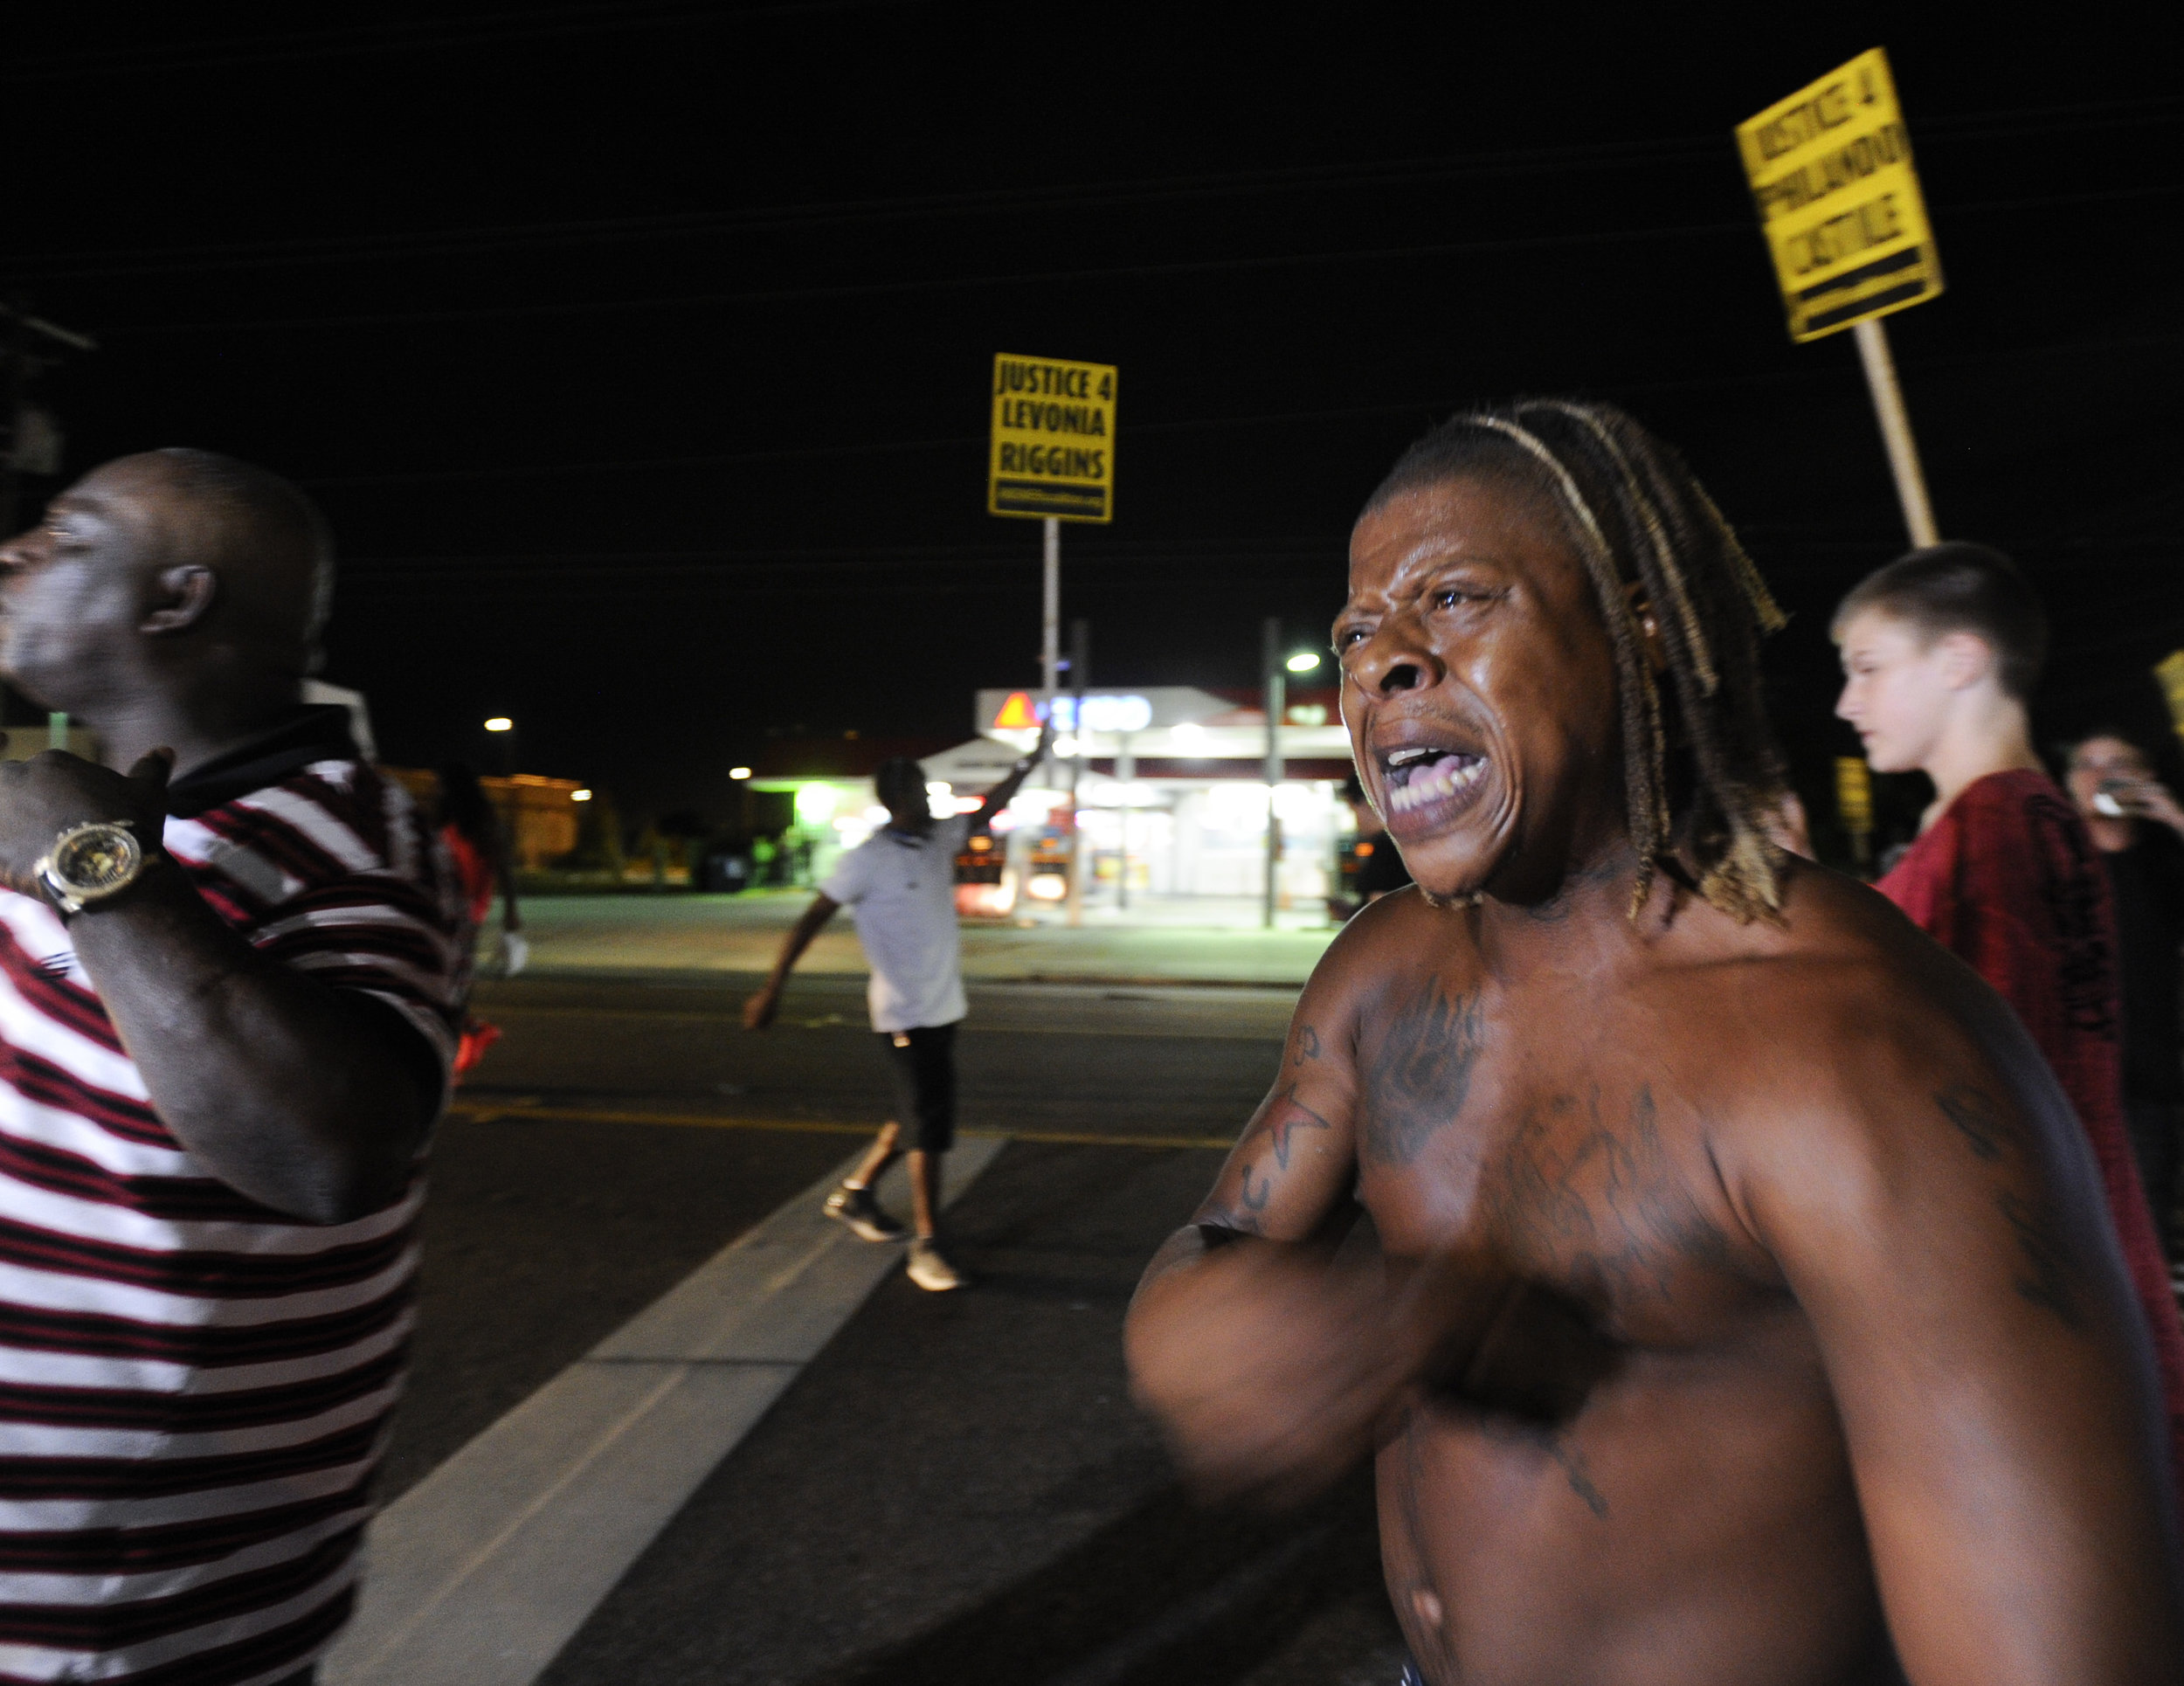  Darrell Judkins, a 29-year-old from Tampa, yells to the crowd during a gathering outside the Get N Go convenience store on South 78th Street in Tampa protesting the death of Levonia Riggins, a 22-year-old who was shot by a Hillsborough County Sherif